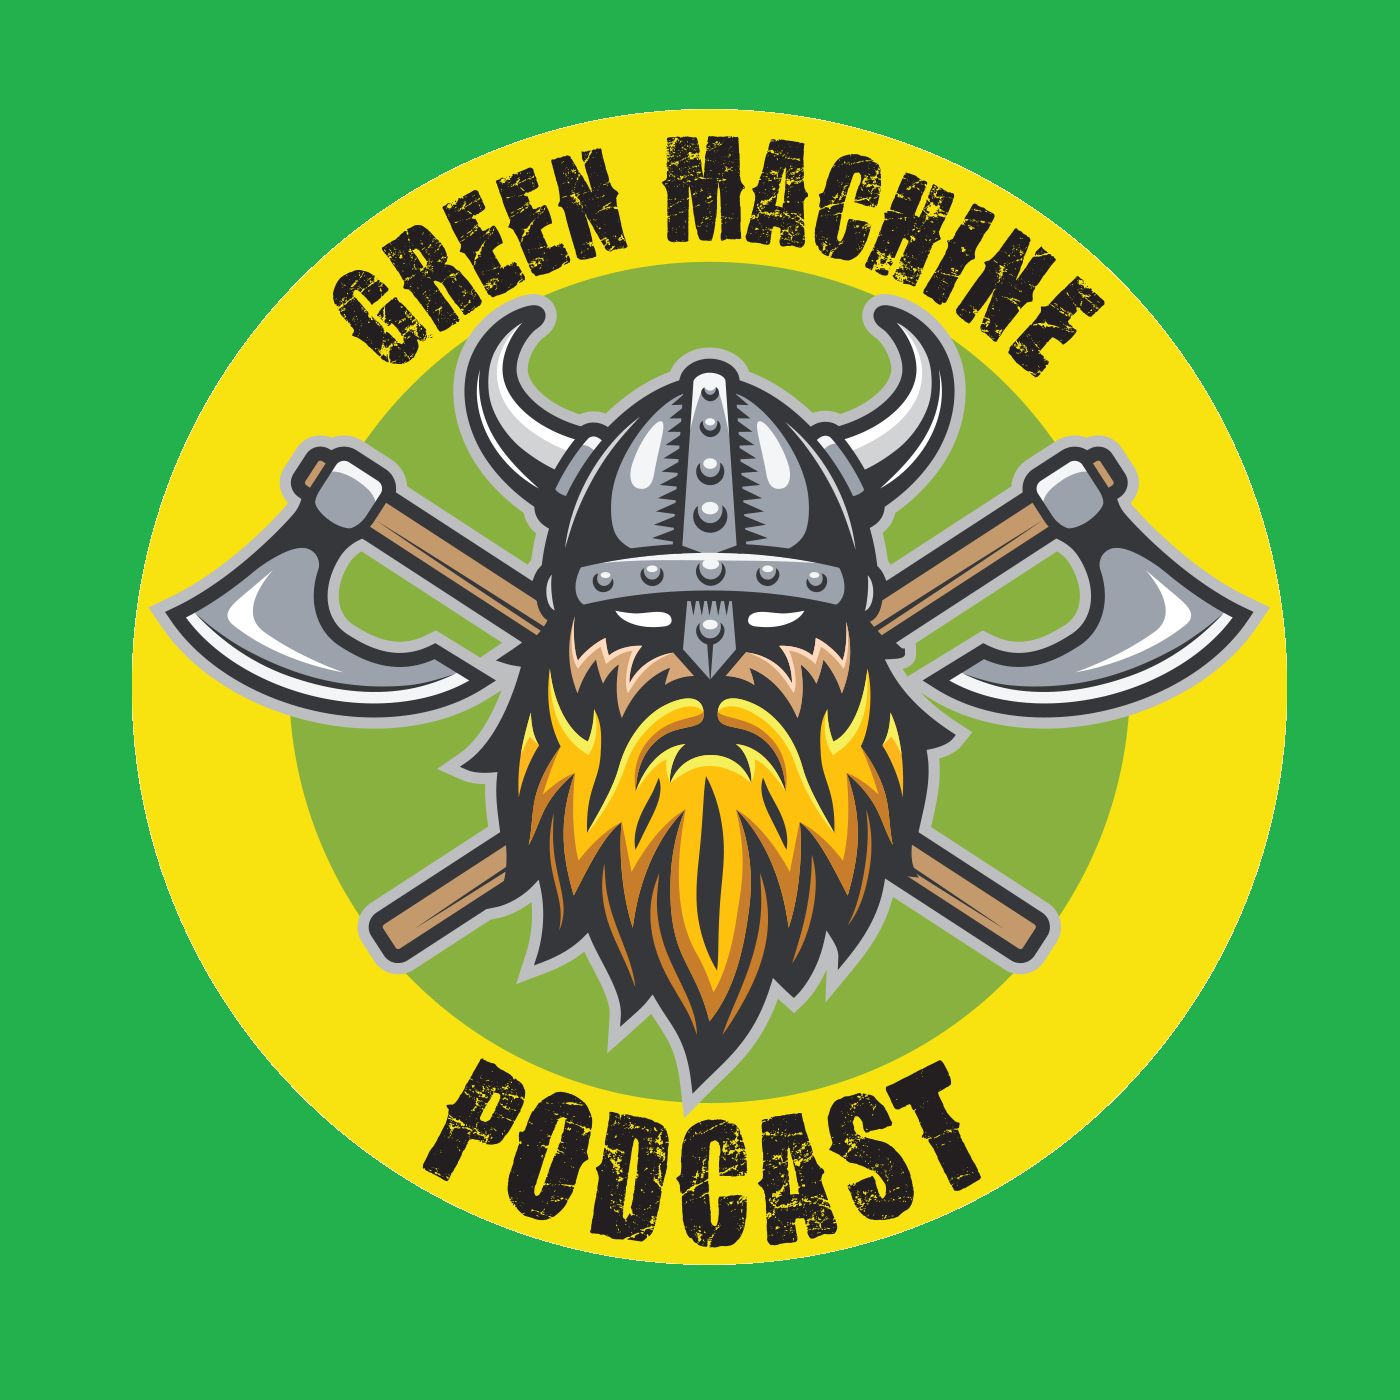 Green Machine Podcast - Episode 260 - Crackers